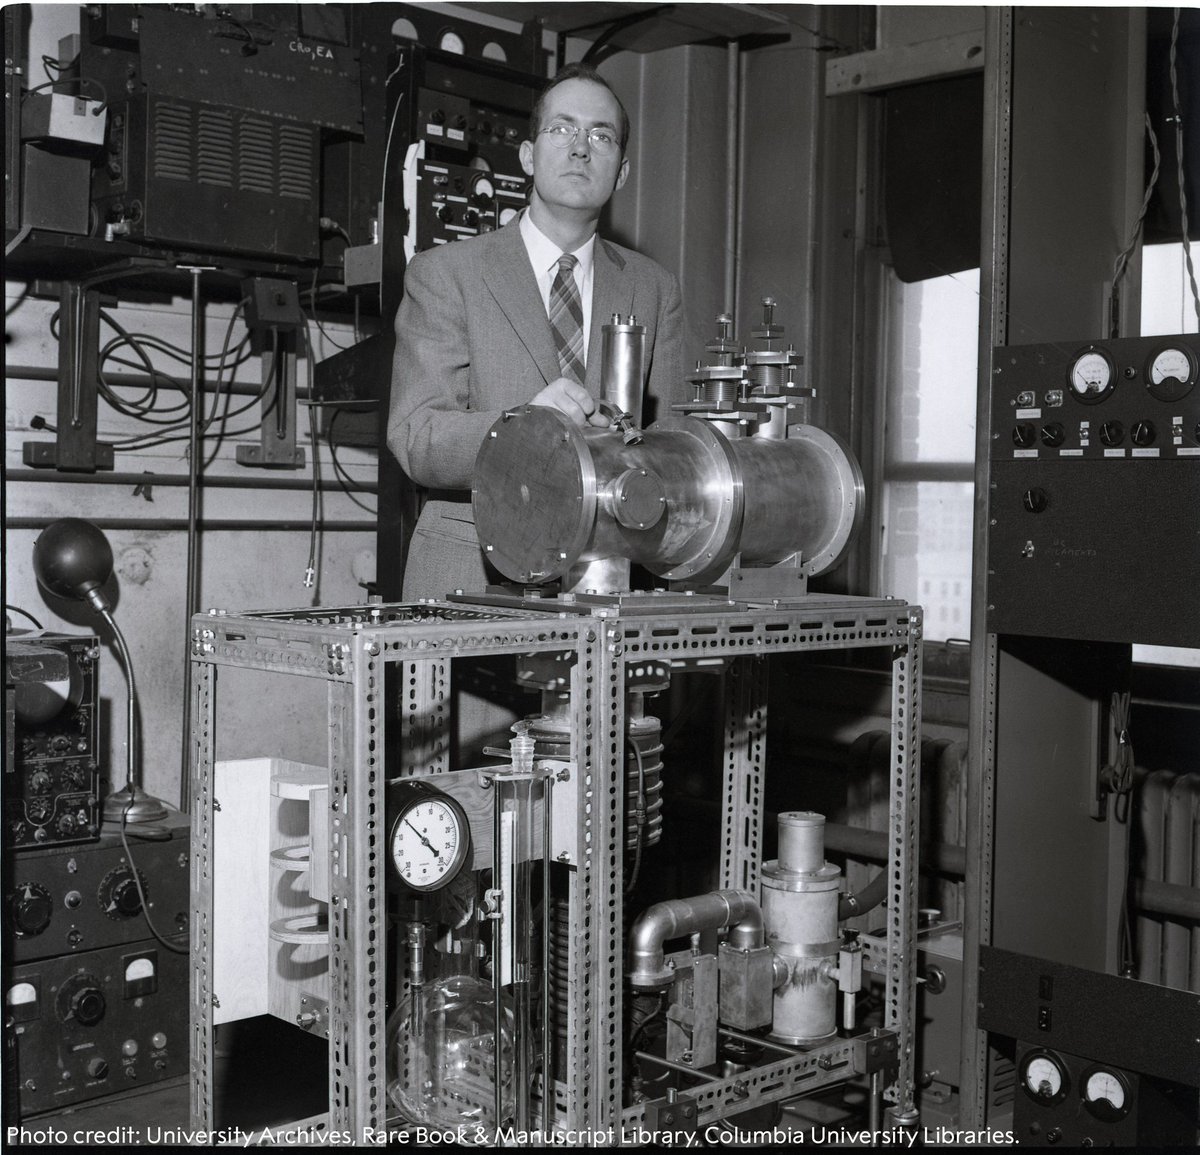 “There are always unturned stones along even well-trod paths. Discovery awaits those who spot and take the trouble to turn those stones.” - 1964 #NobelPrize laureate in physics Charles Townes on the path of discovery. Townes built the very first maser and developed the laser.